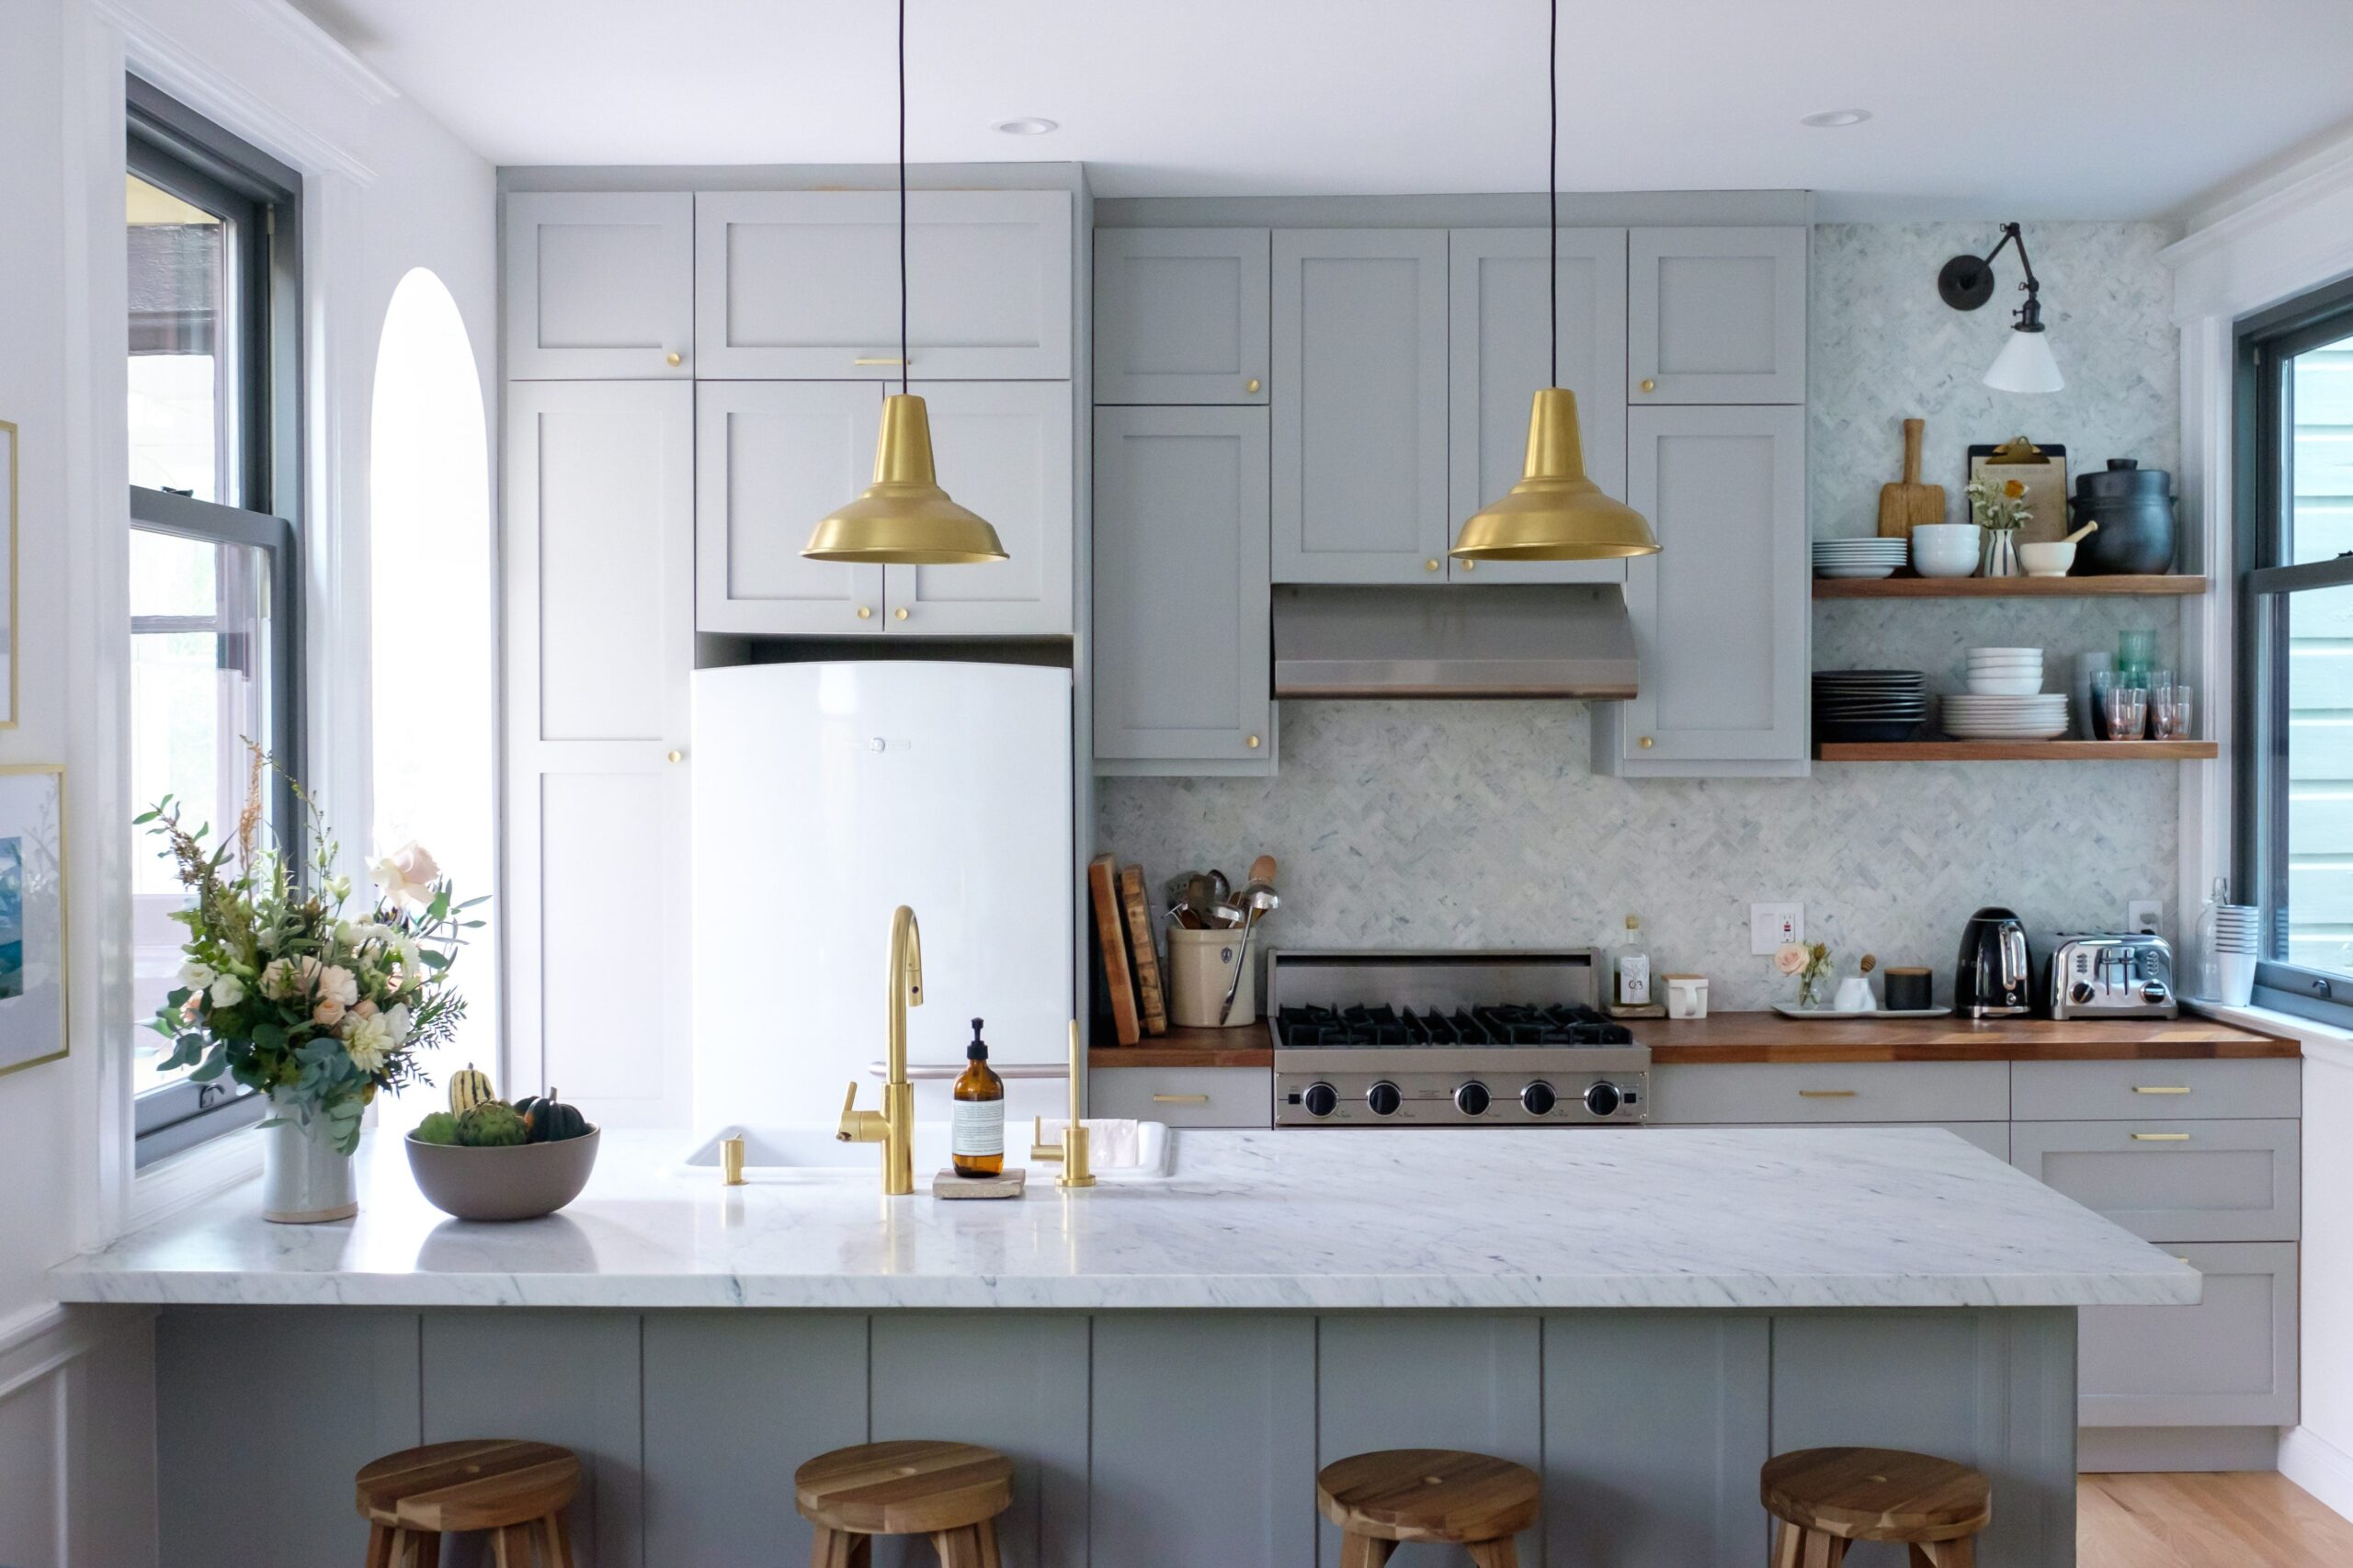 Why IKEA Kitchens Are So Popular - 5 Reasons Designers Love Ikea